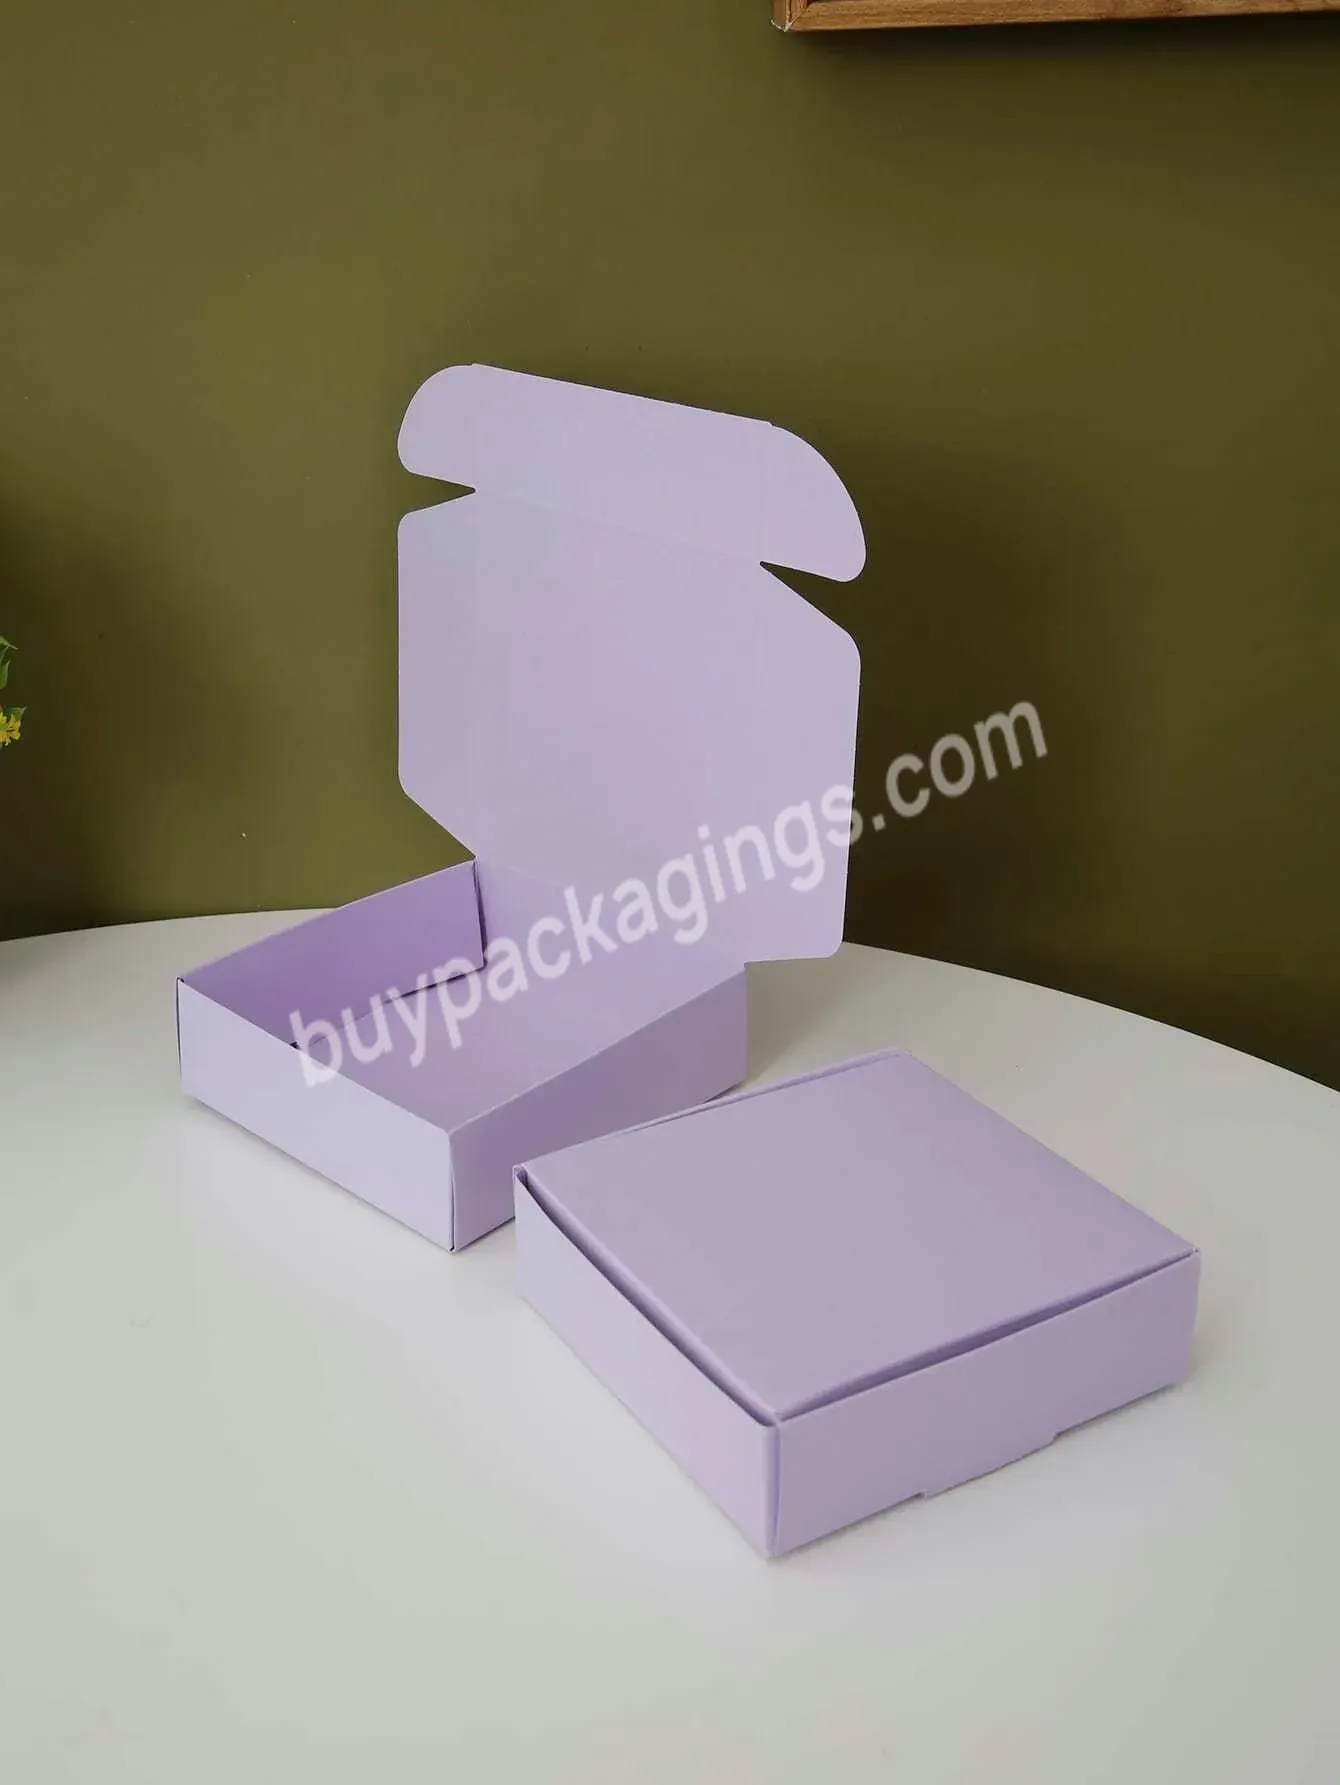 Free Design Custom Boxes Perfect For Small Businesses Shipping Gift Boxes - Buy Custom 6x4x2 Shipping Boxes,Cusotm Shipping Box Custom Box Wig,Custom Box Manufacturers Custom Box Packag Custom Box Packaged.